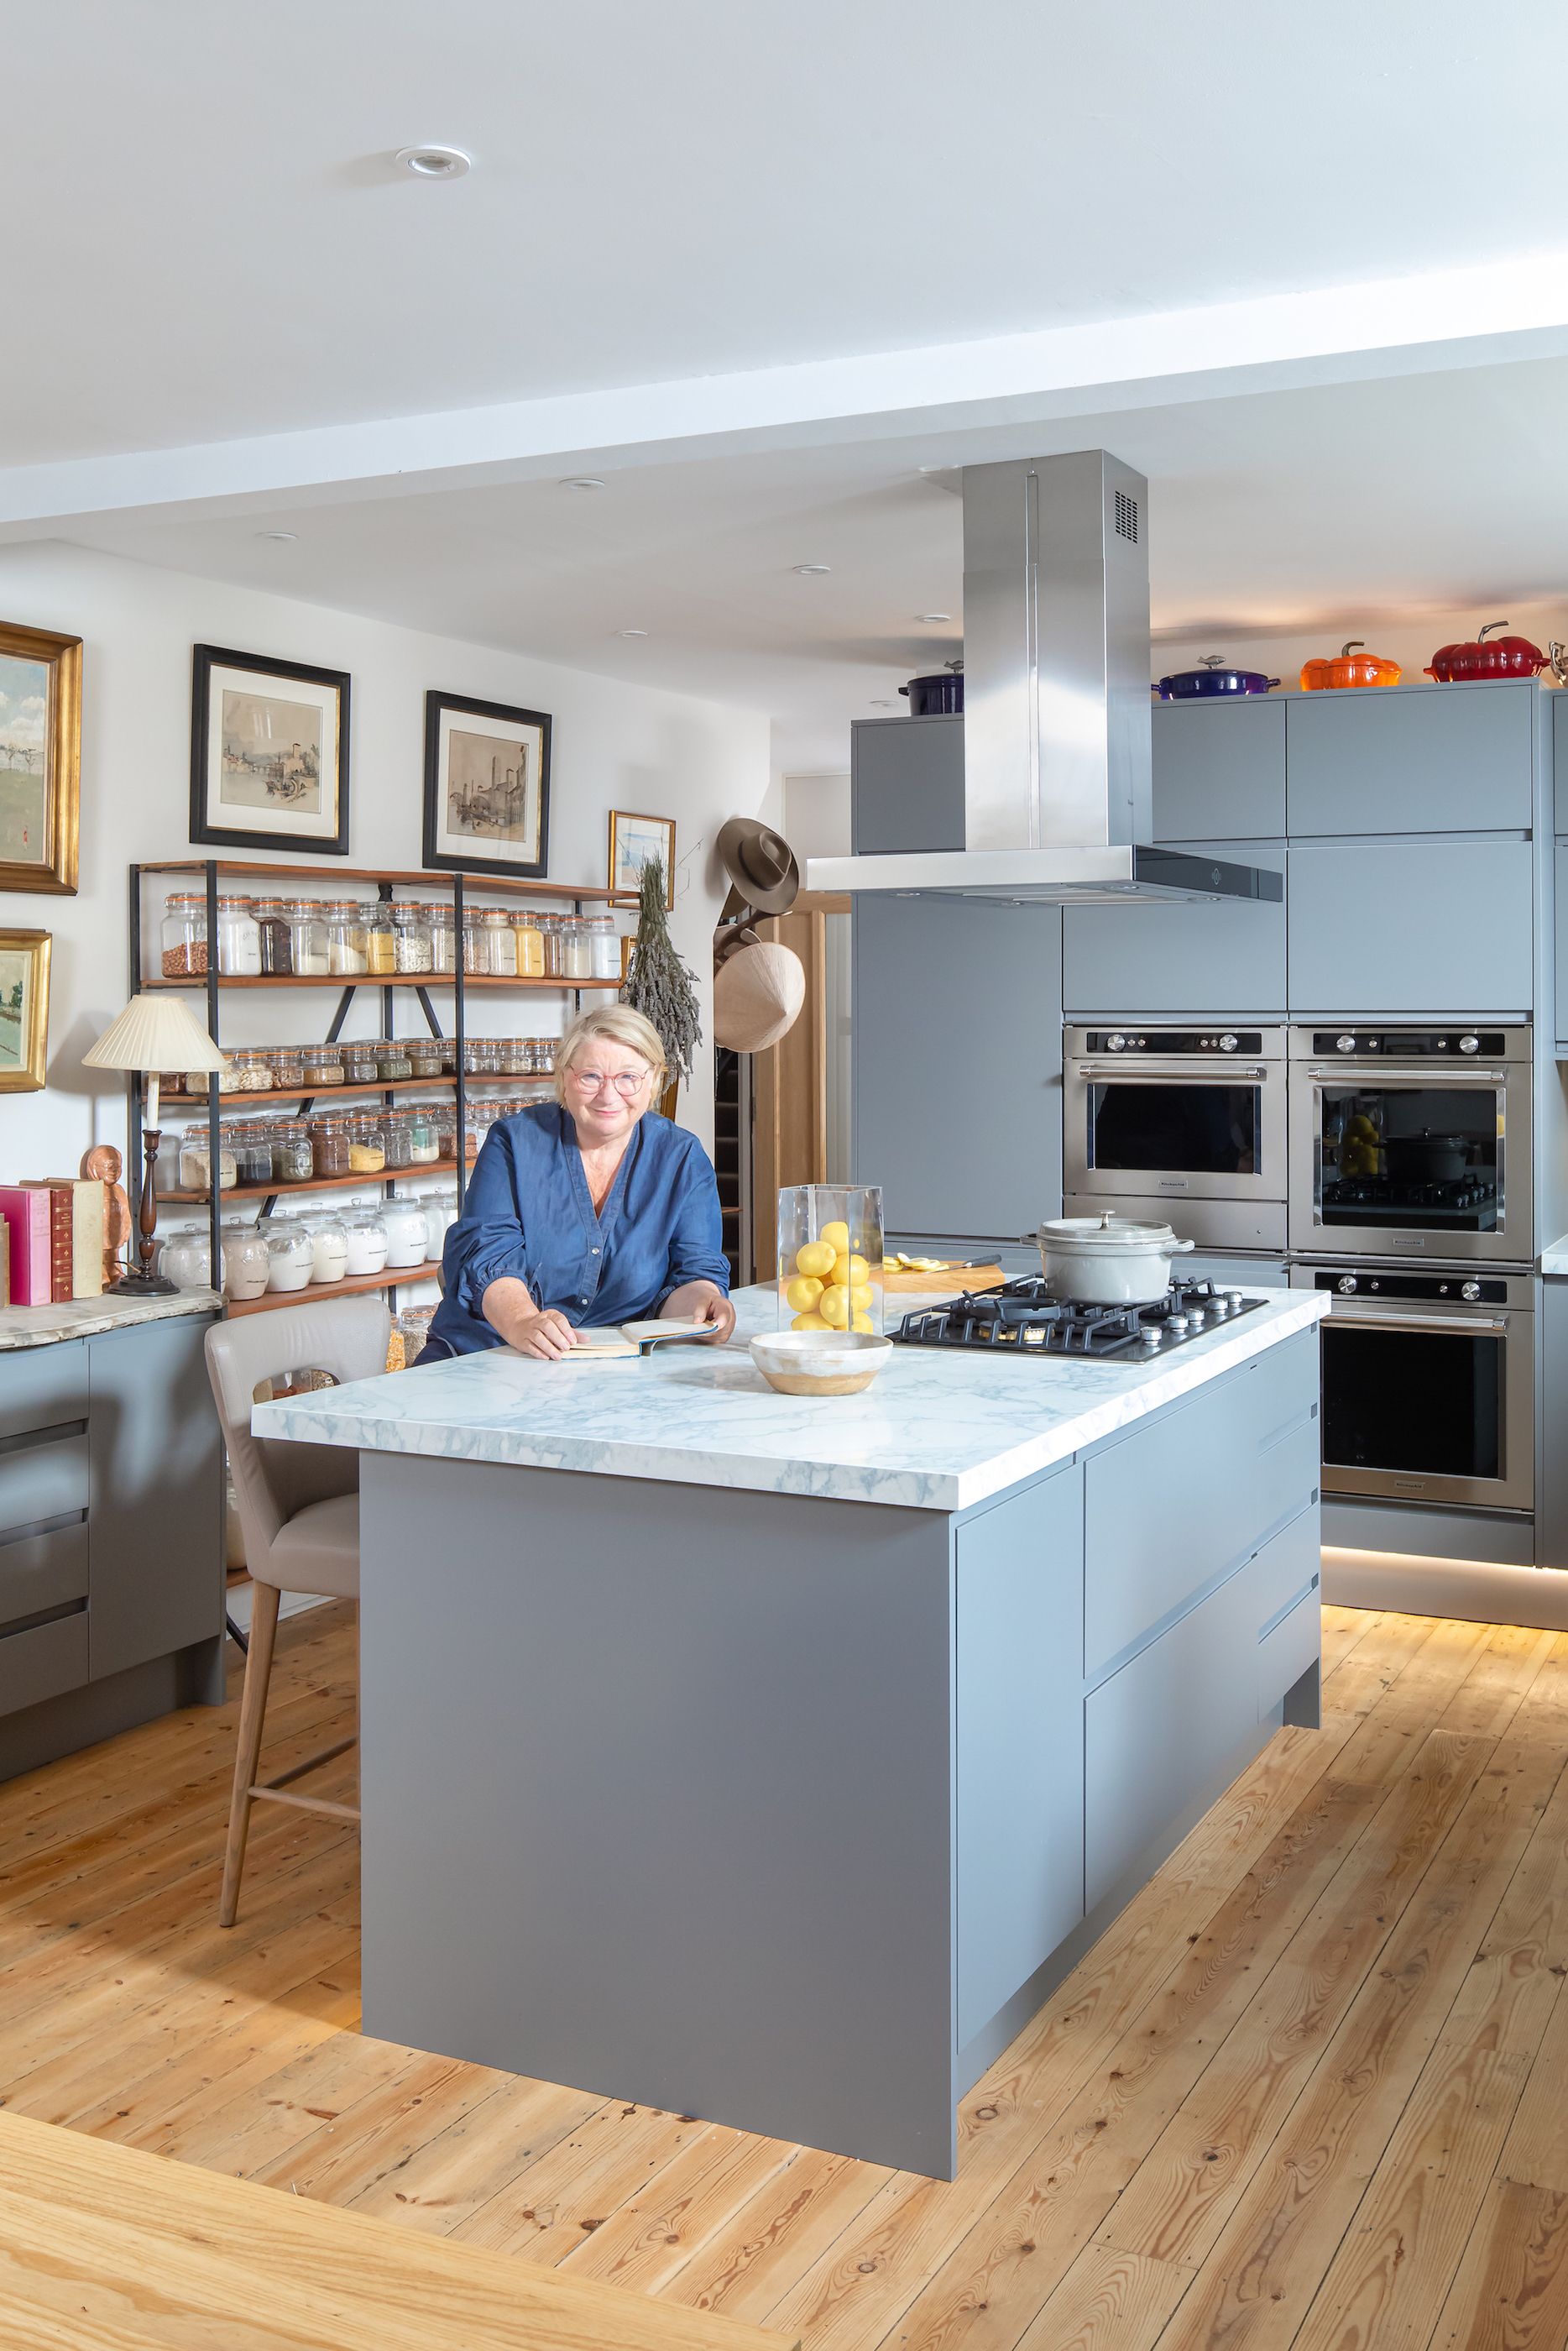 New Kitchen Aid Gadgets for November! - Kitchens With Rosemary Shrager